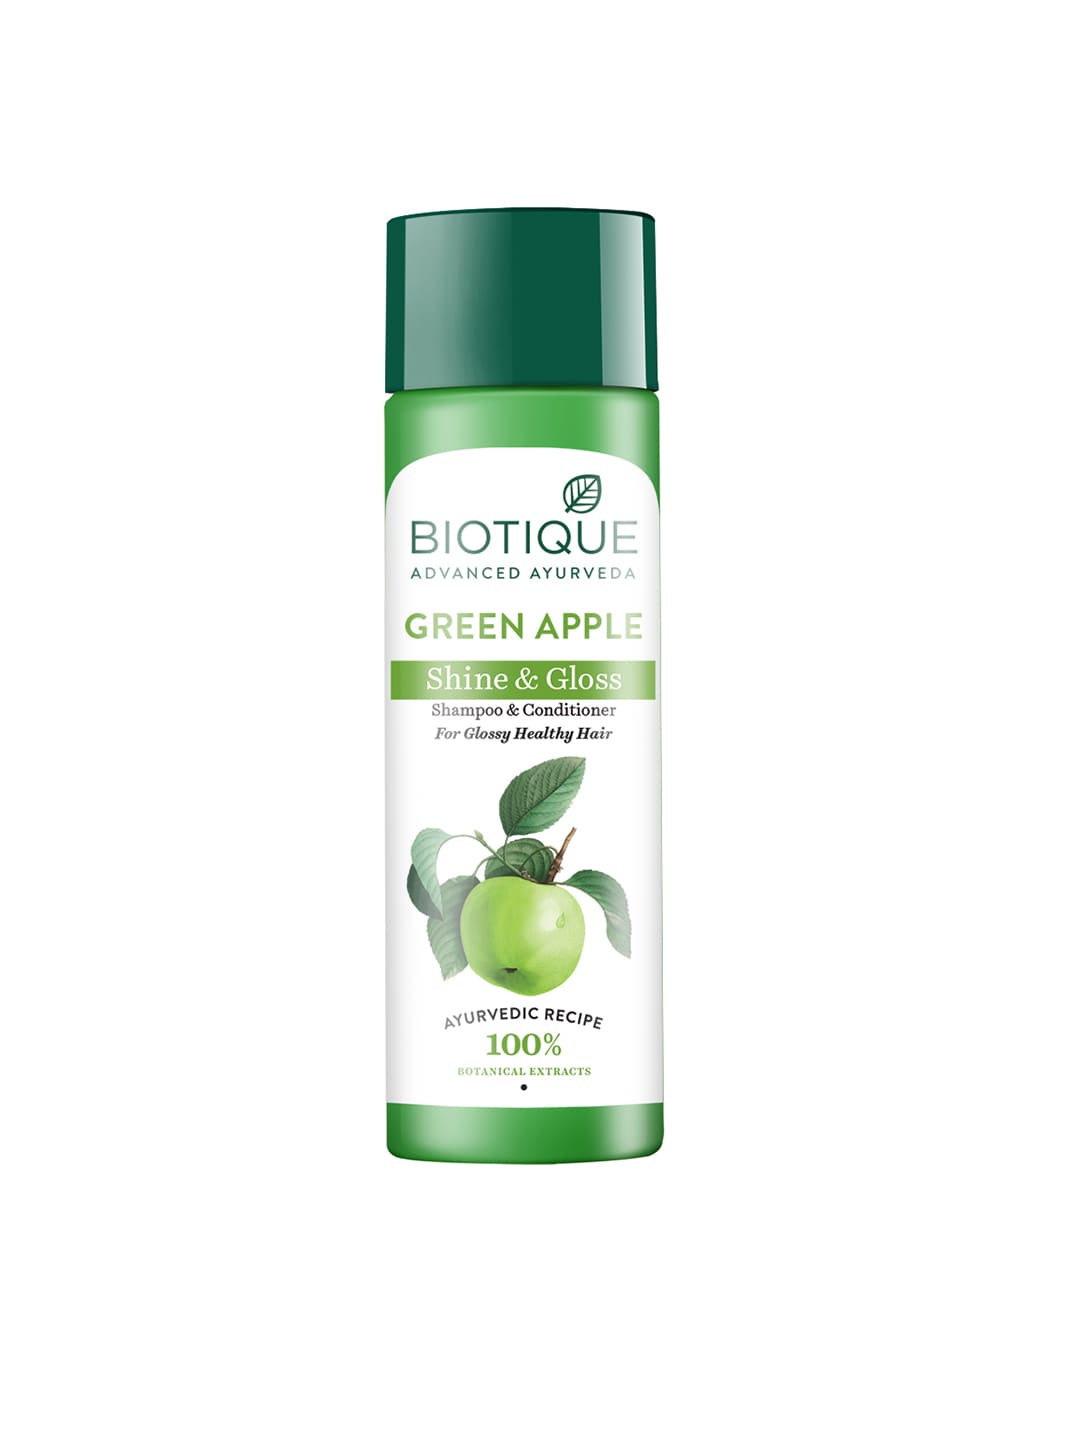 Biotique Bio Green Apple Purifying Shampoo & Conditioner for Oily Scalp & Hair 190 ml Price in India